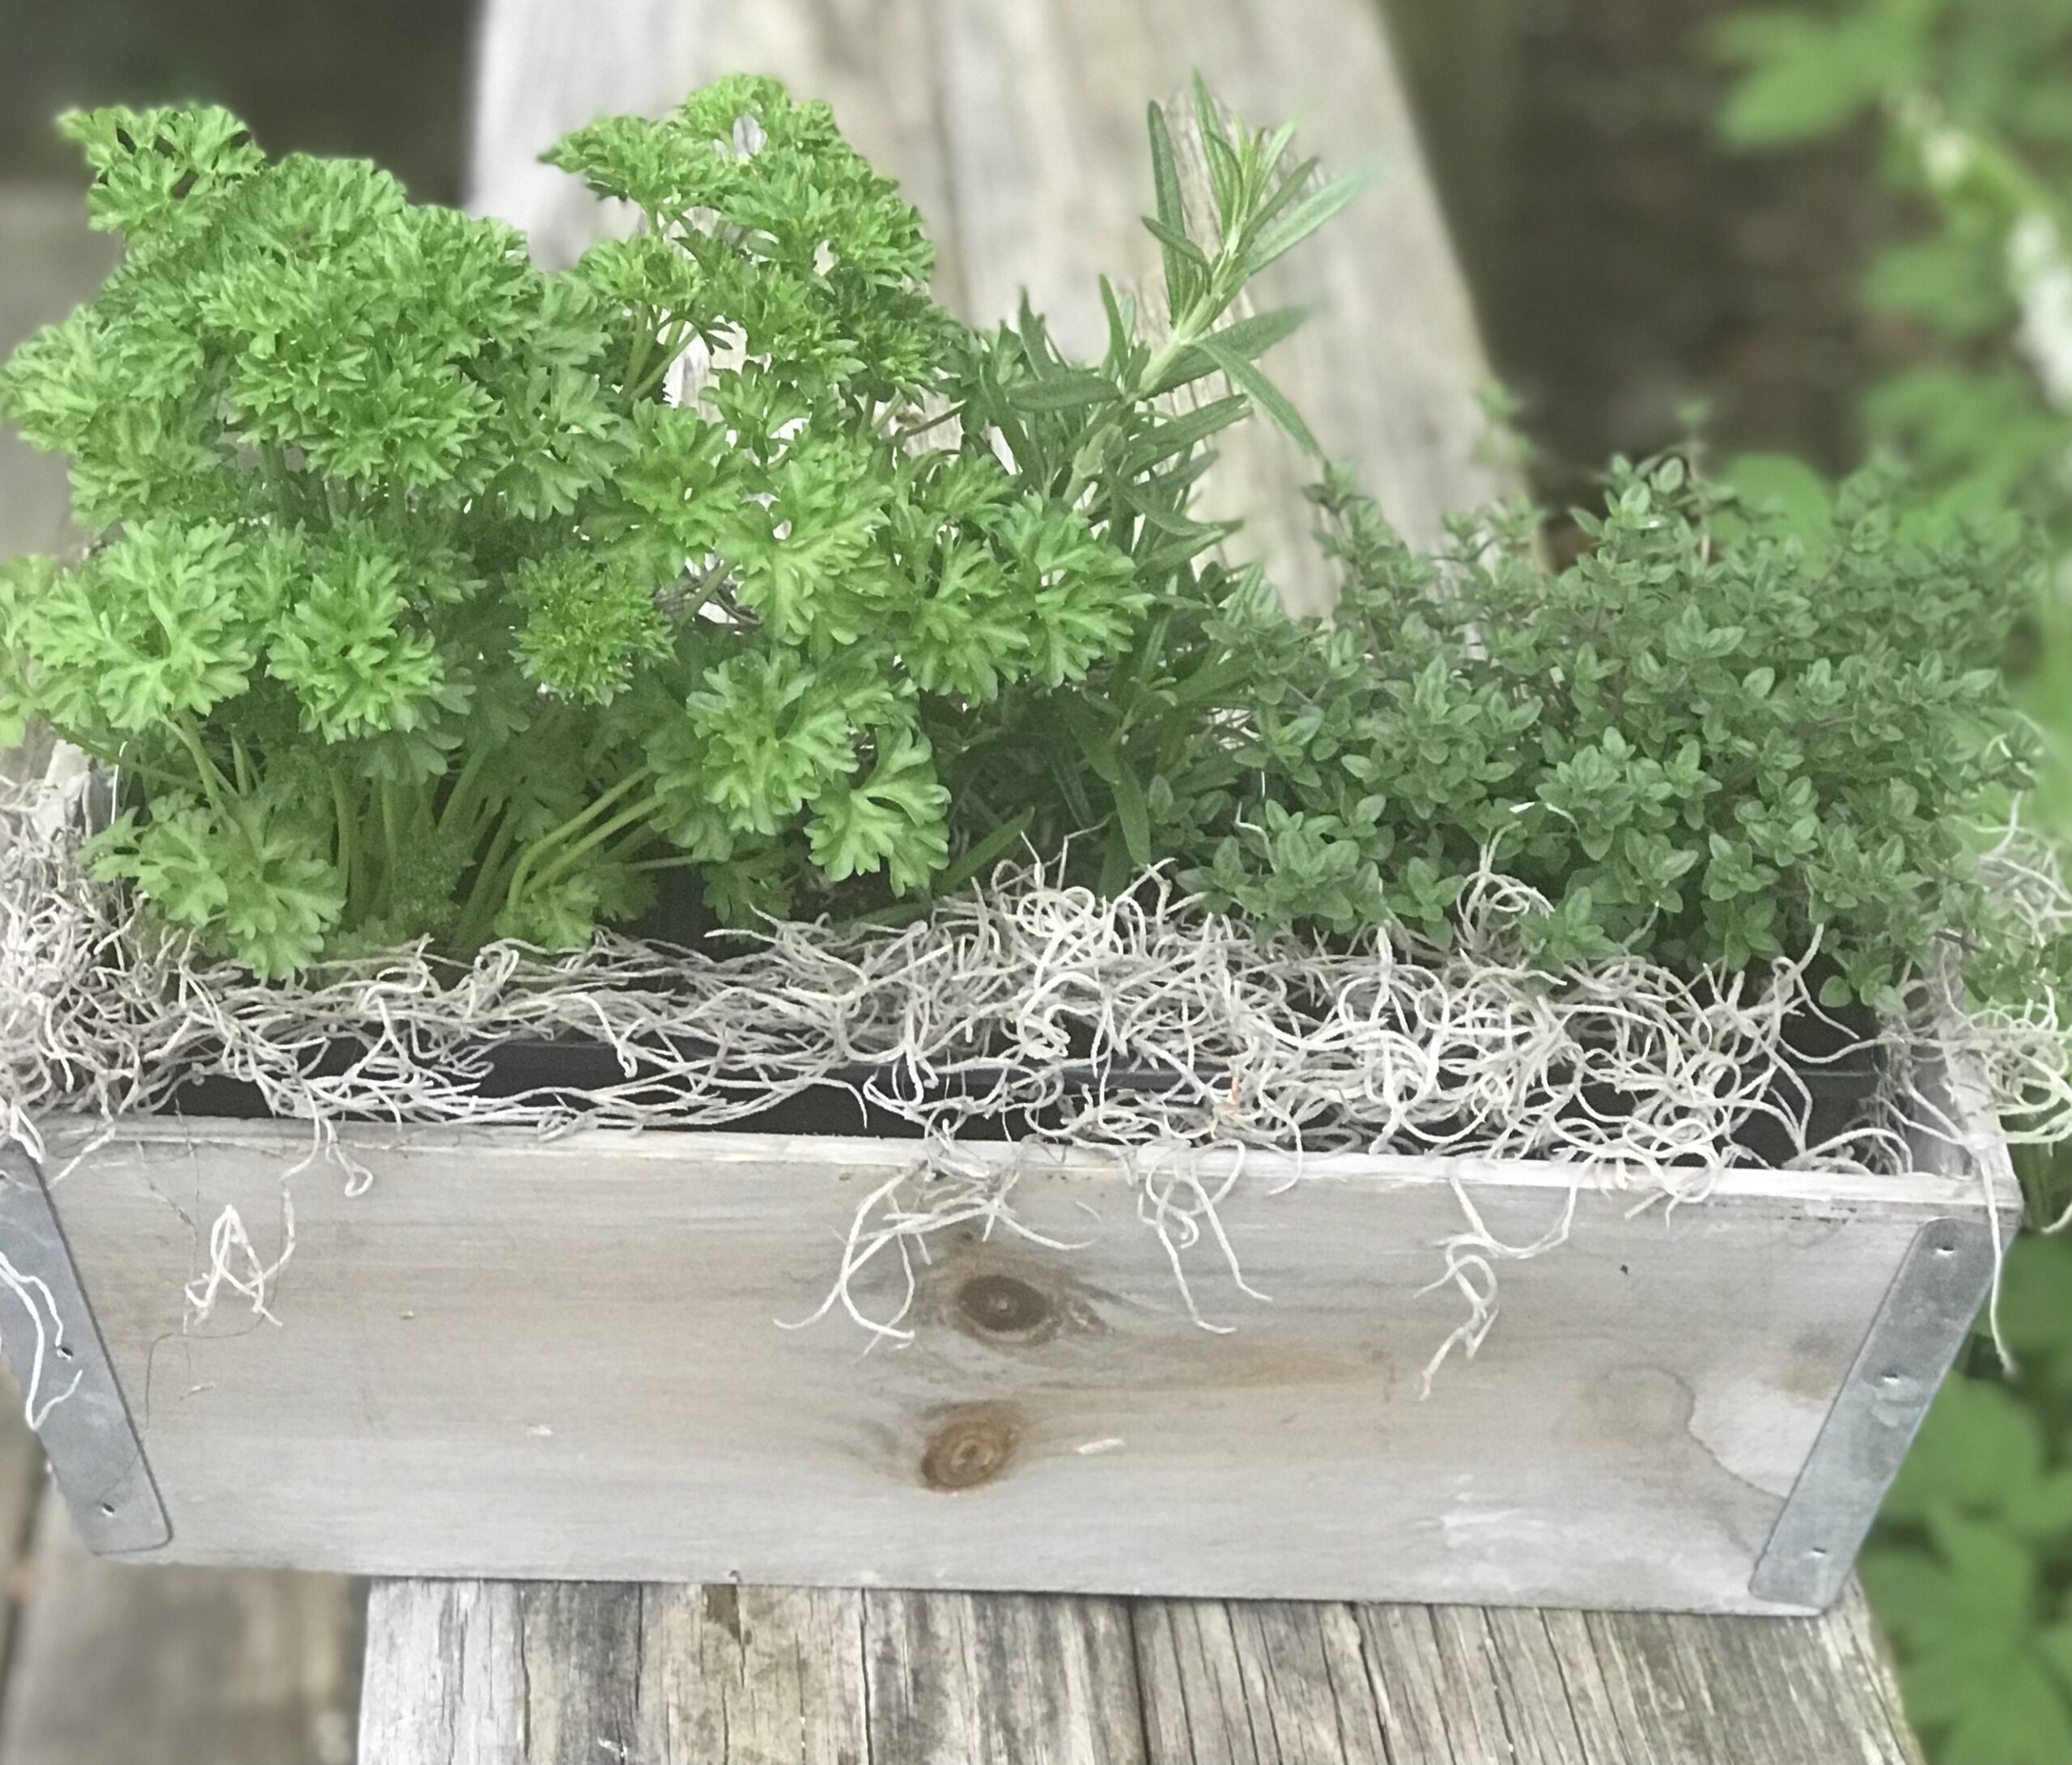 Herb garden in a wooden box with mint leaves